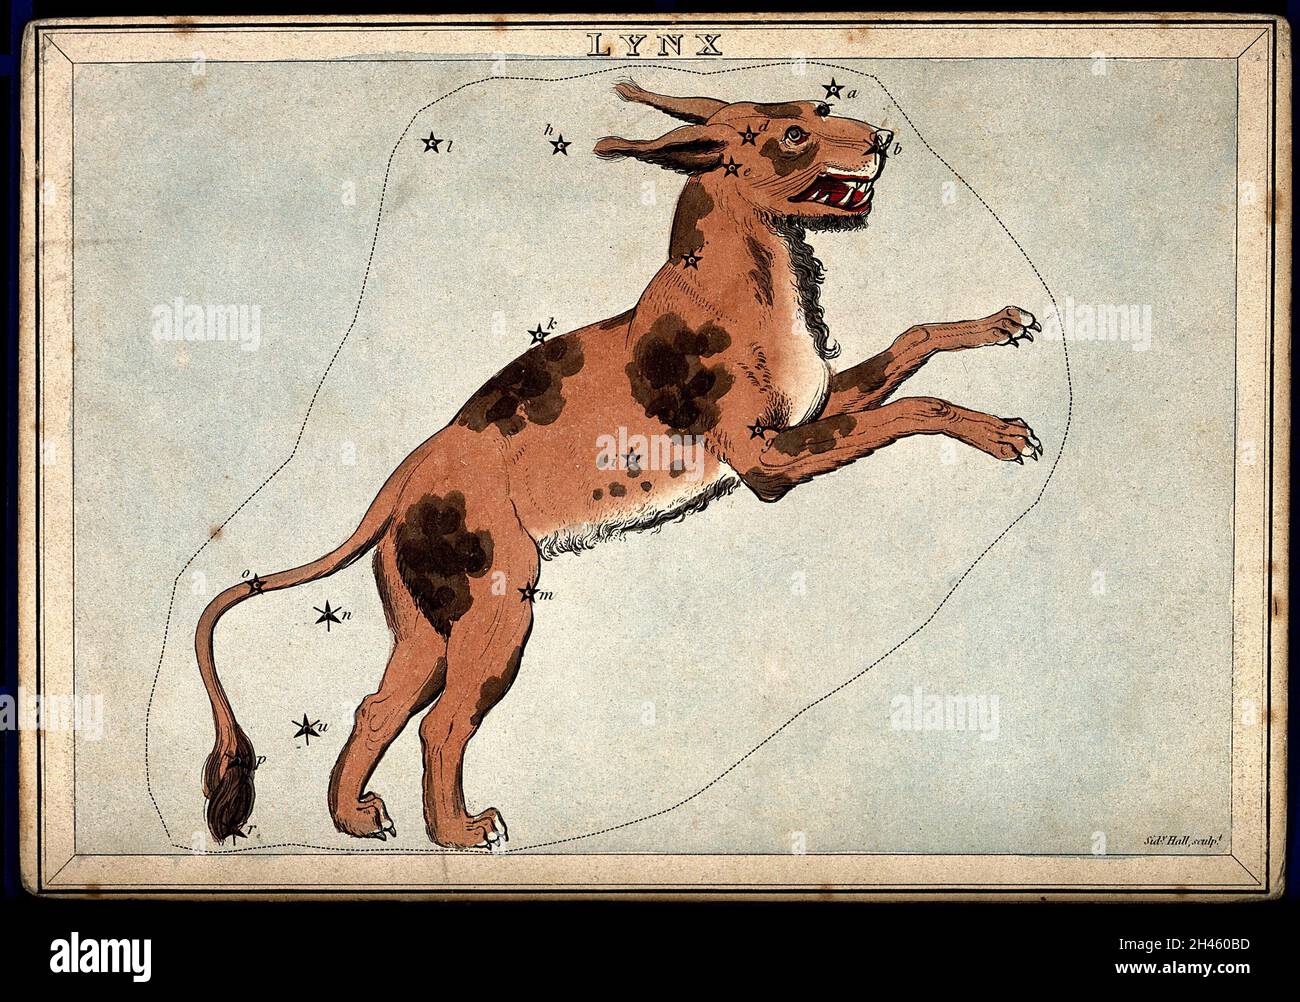 Astrology: signs of the zodiac, Lynx. Coloured engraving by S. Hall. Stock Photo